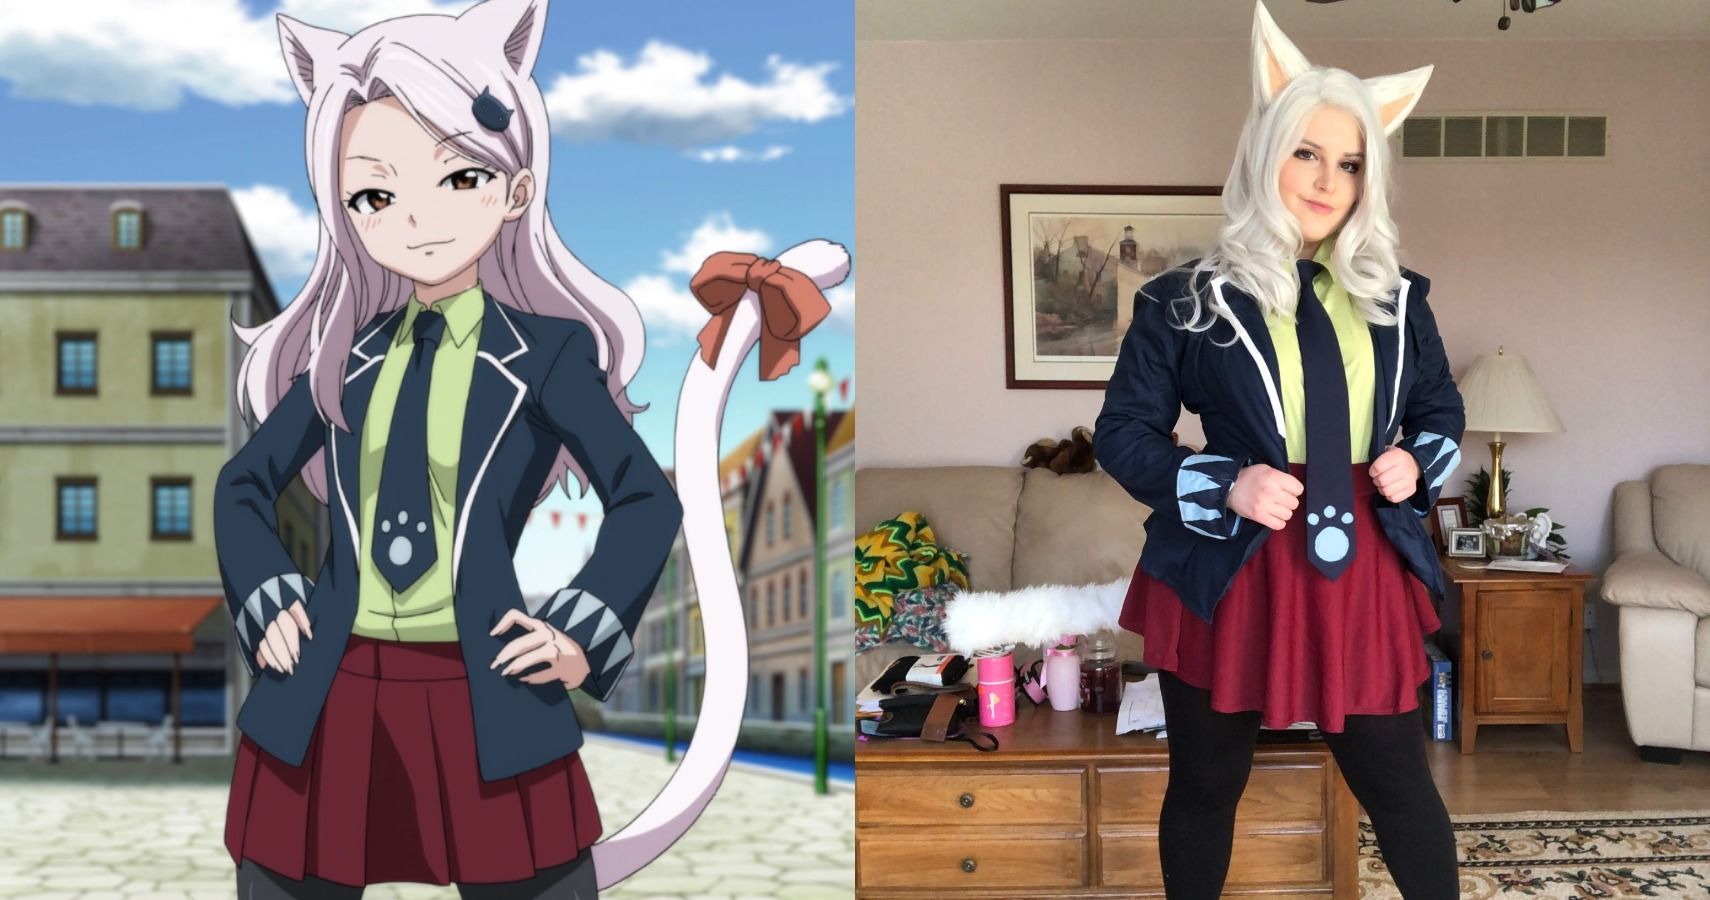 Tail Cosplay